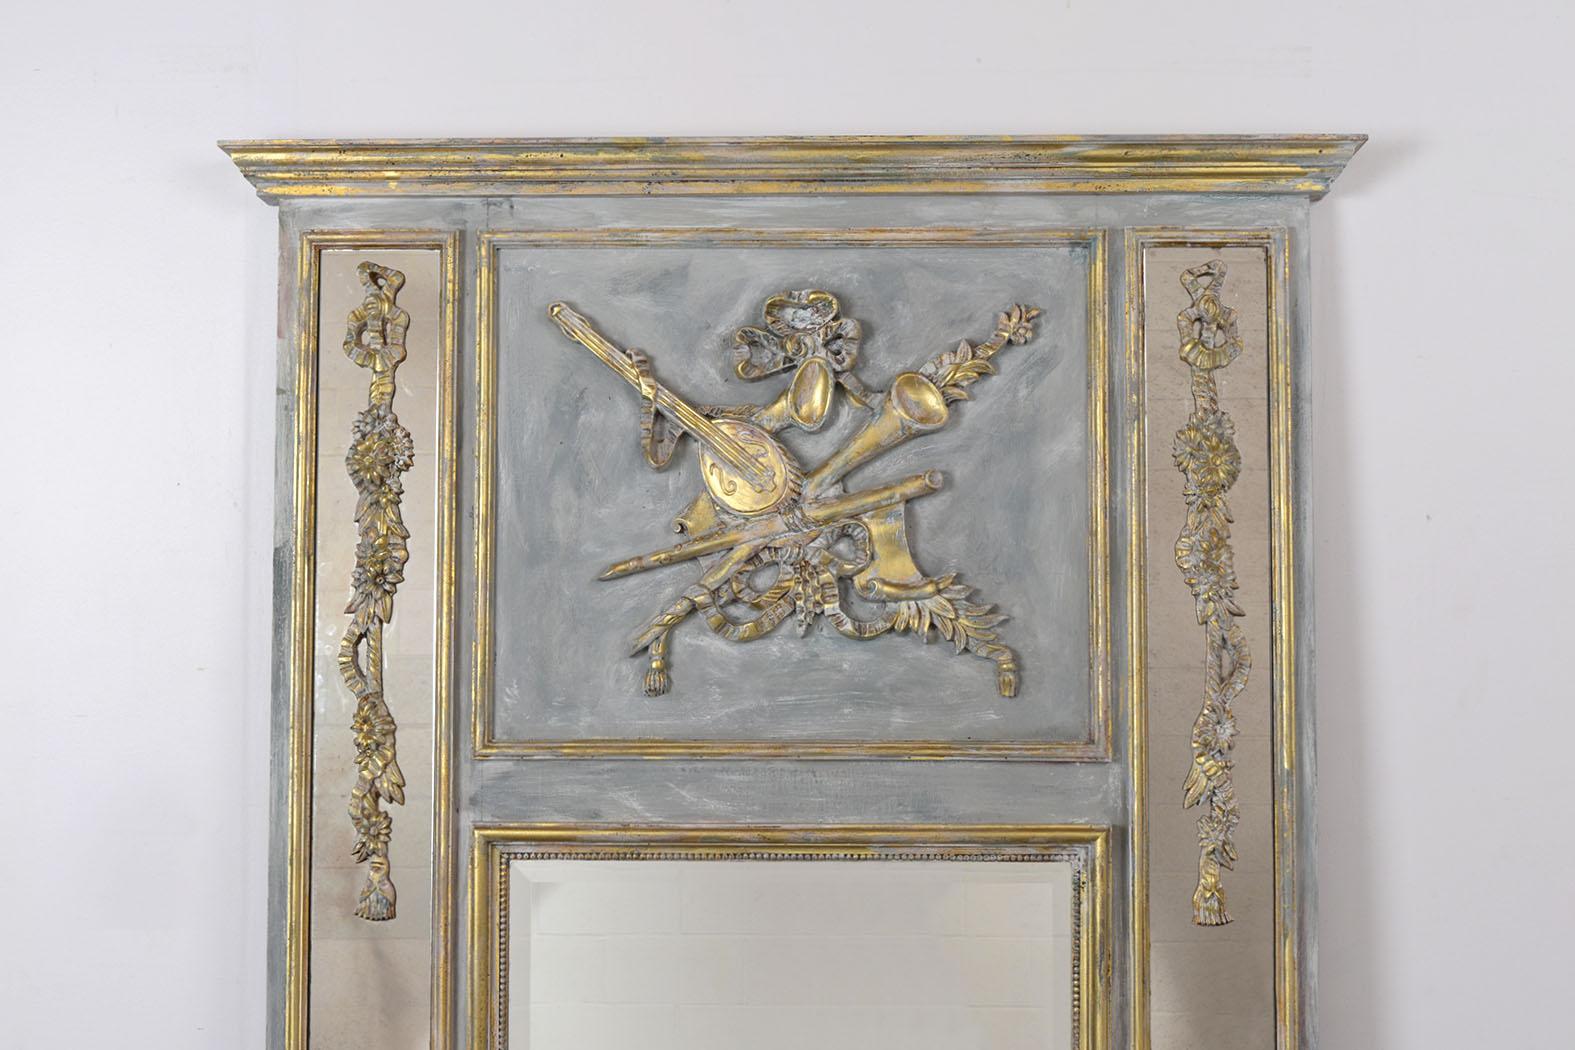 French 1930s Louis XVI Style Trumeau Mirror is in good condition and features large intricately carved wood moldings of instruments, garlands flowers, and urns vases. This trumeau also has a gilt and distressed painted finish and a beveled center